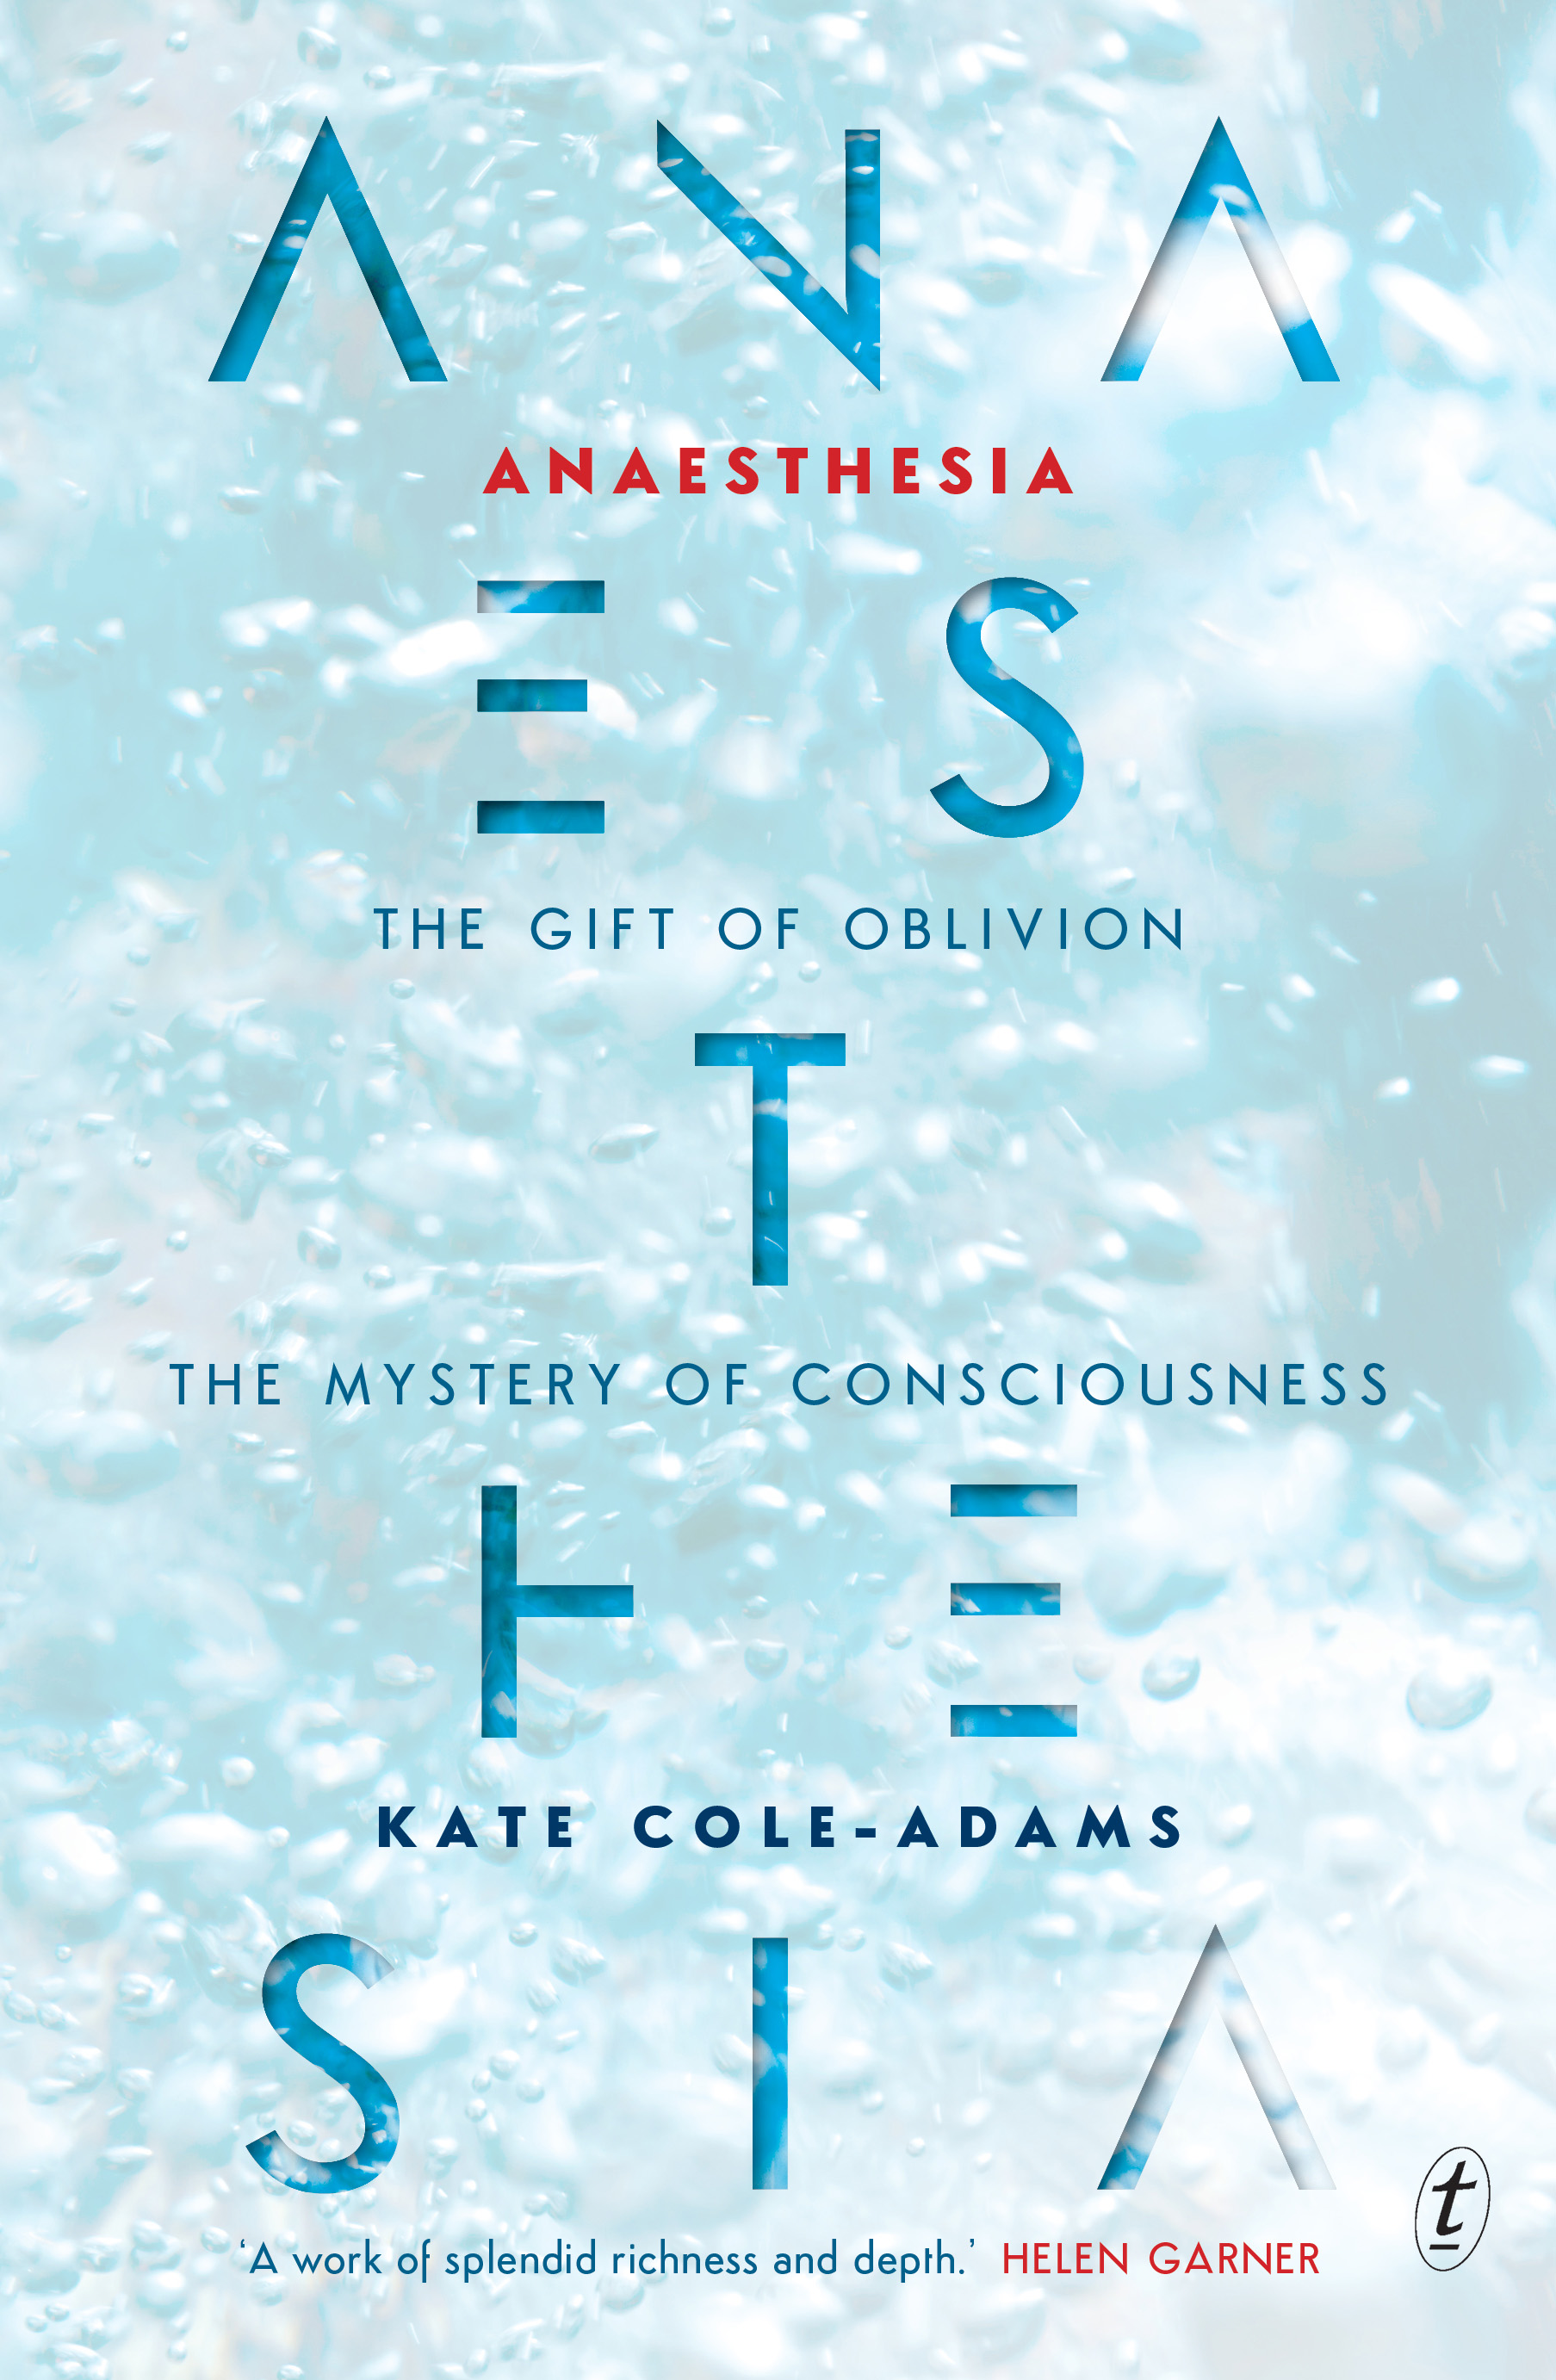  Anaesthesia – The gift of oblivion and the mystery of consciousness.